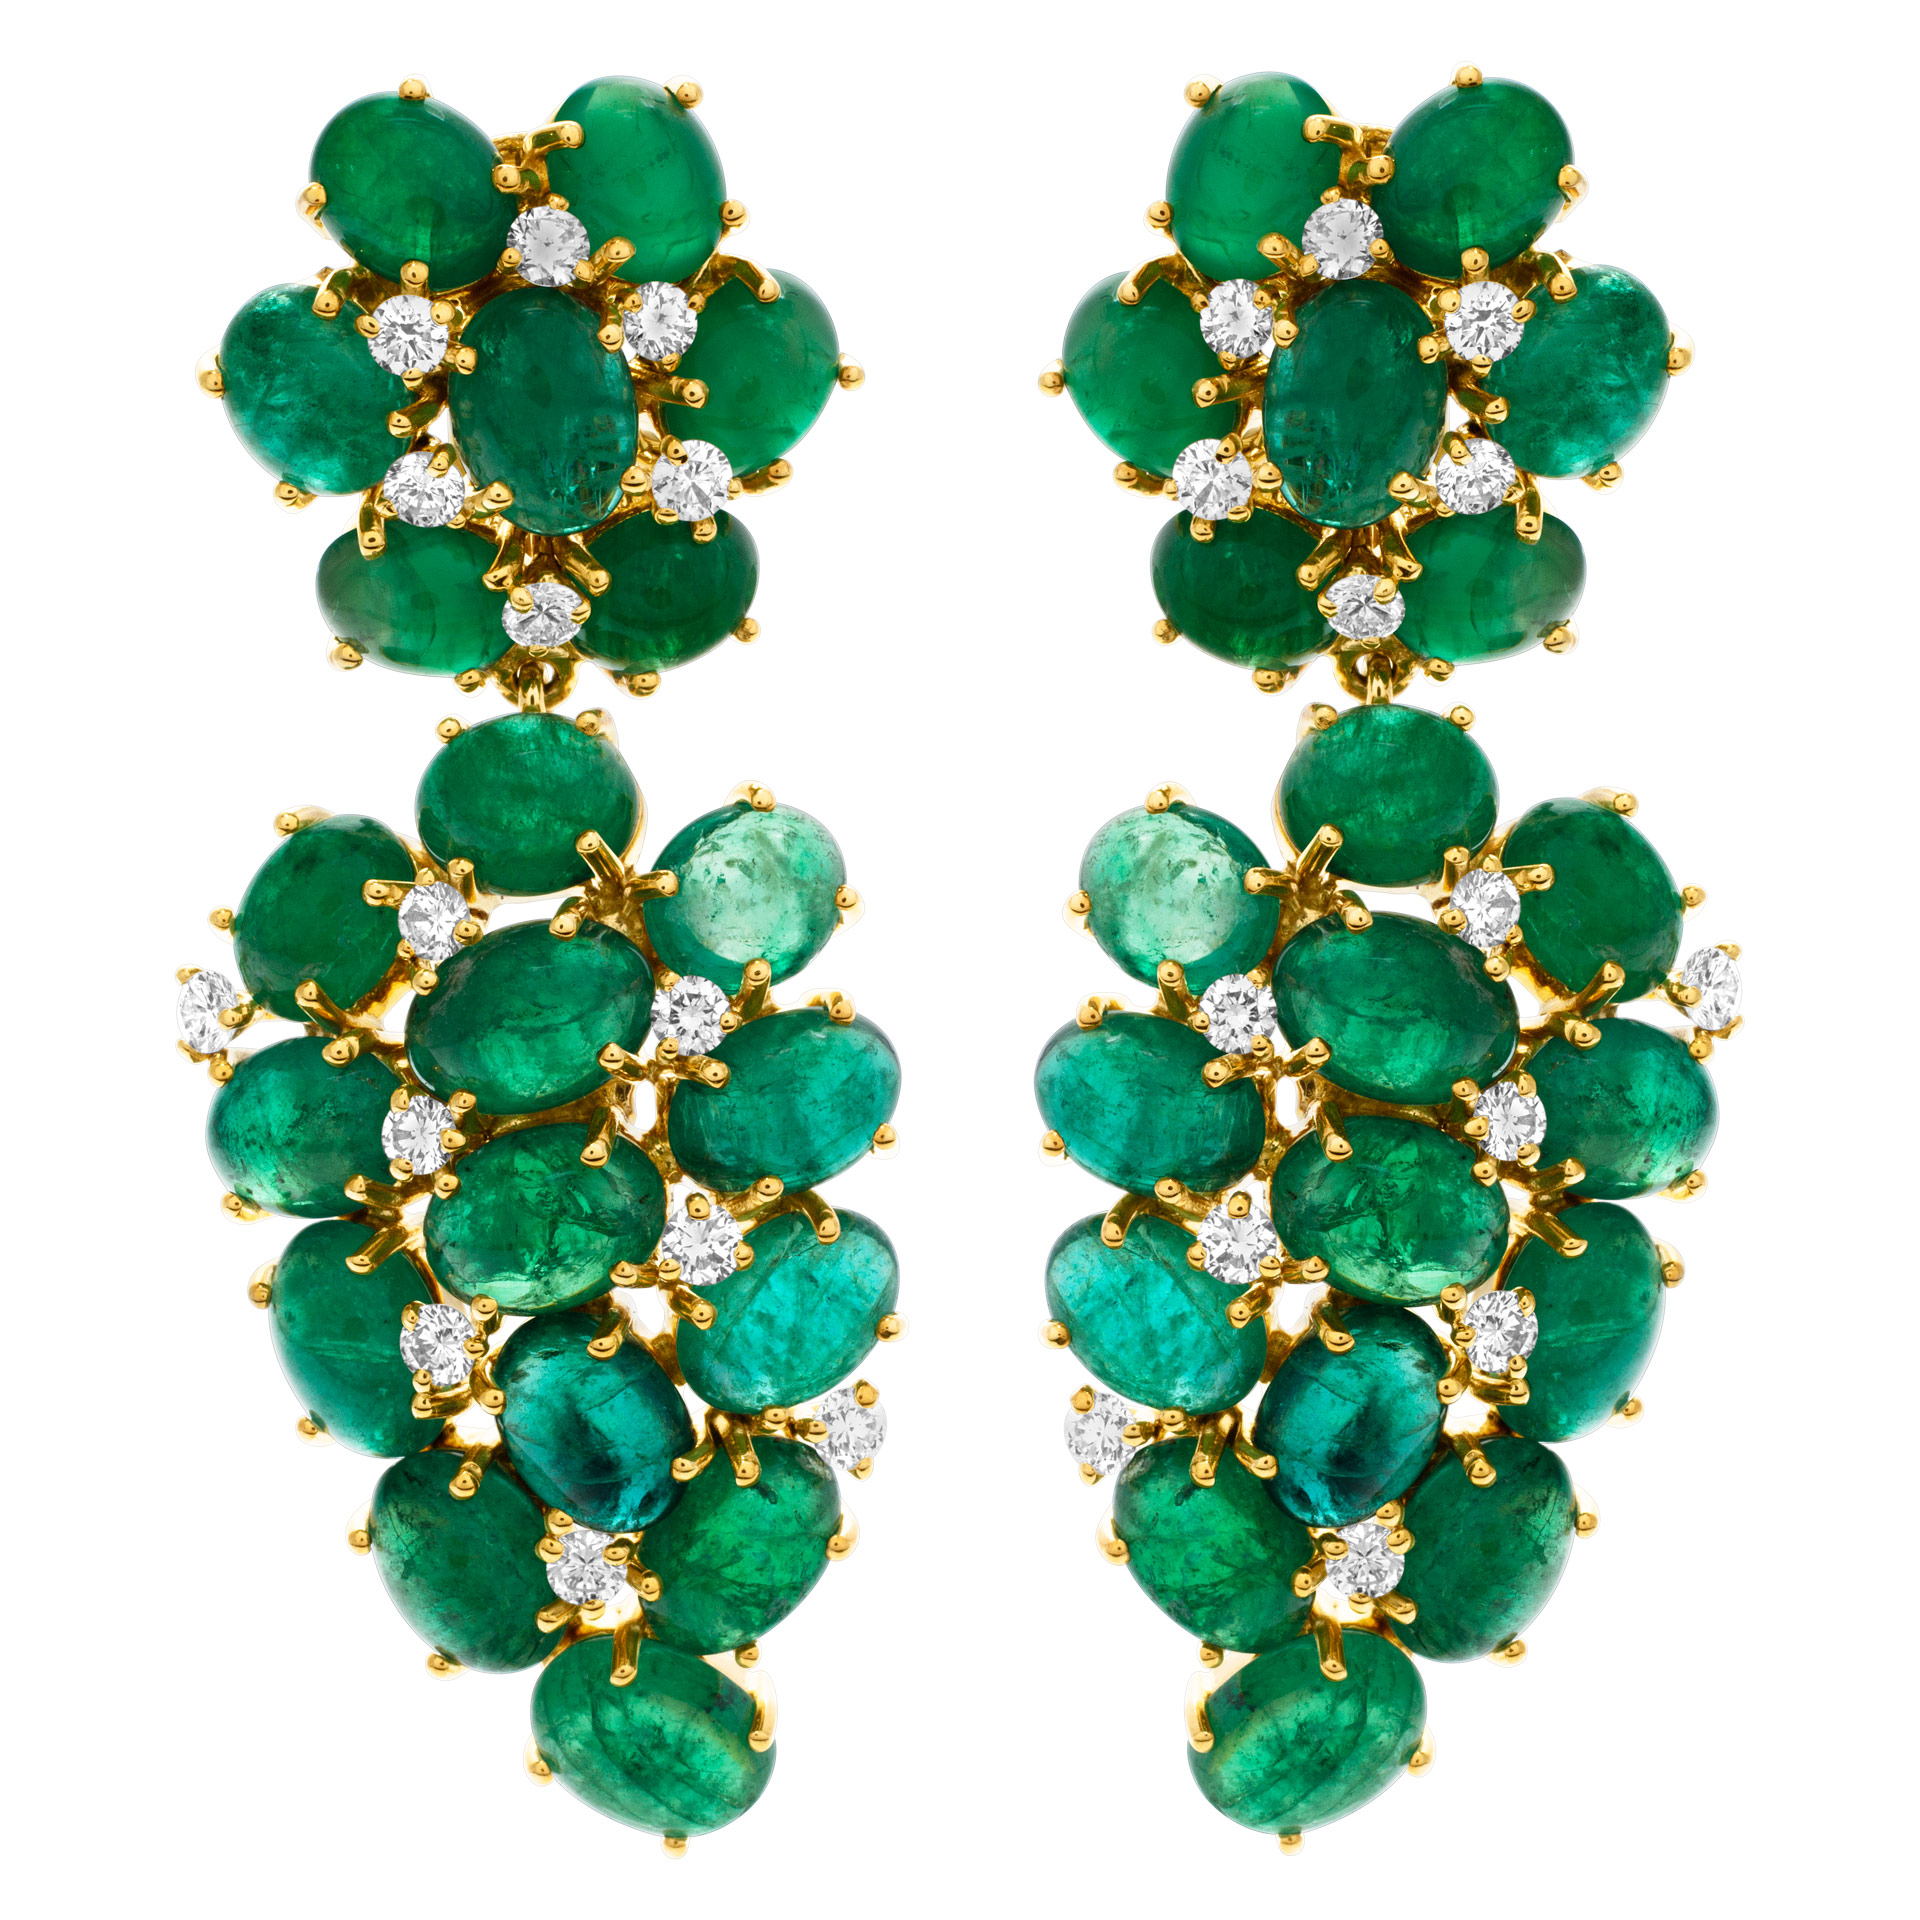 Zambian earrings with 1.31 carats in round cut diamonds and 30.66 carats in emeralds set in 18k gold image 1